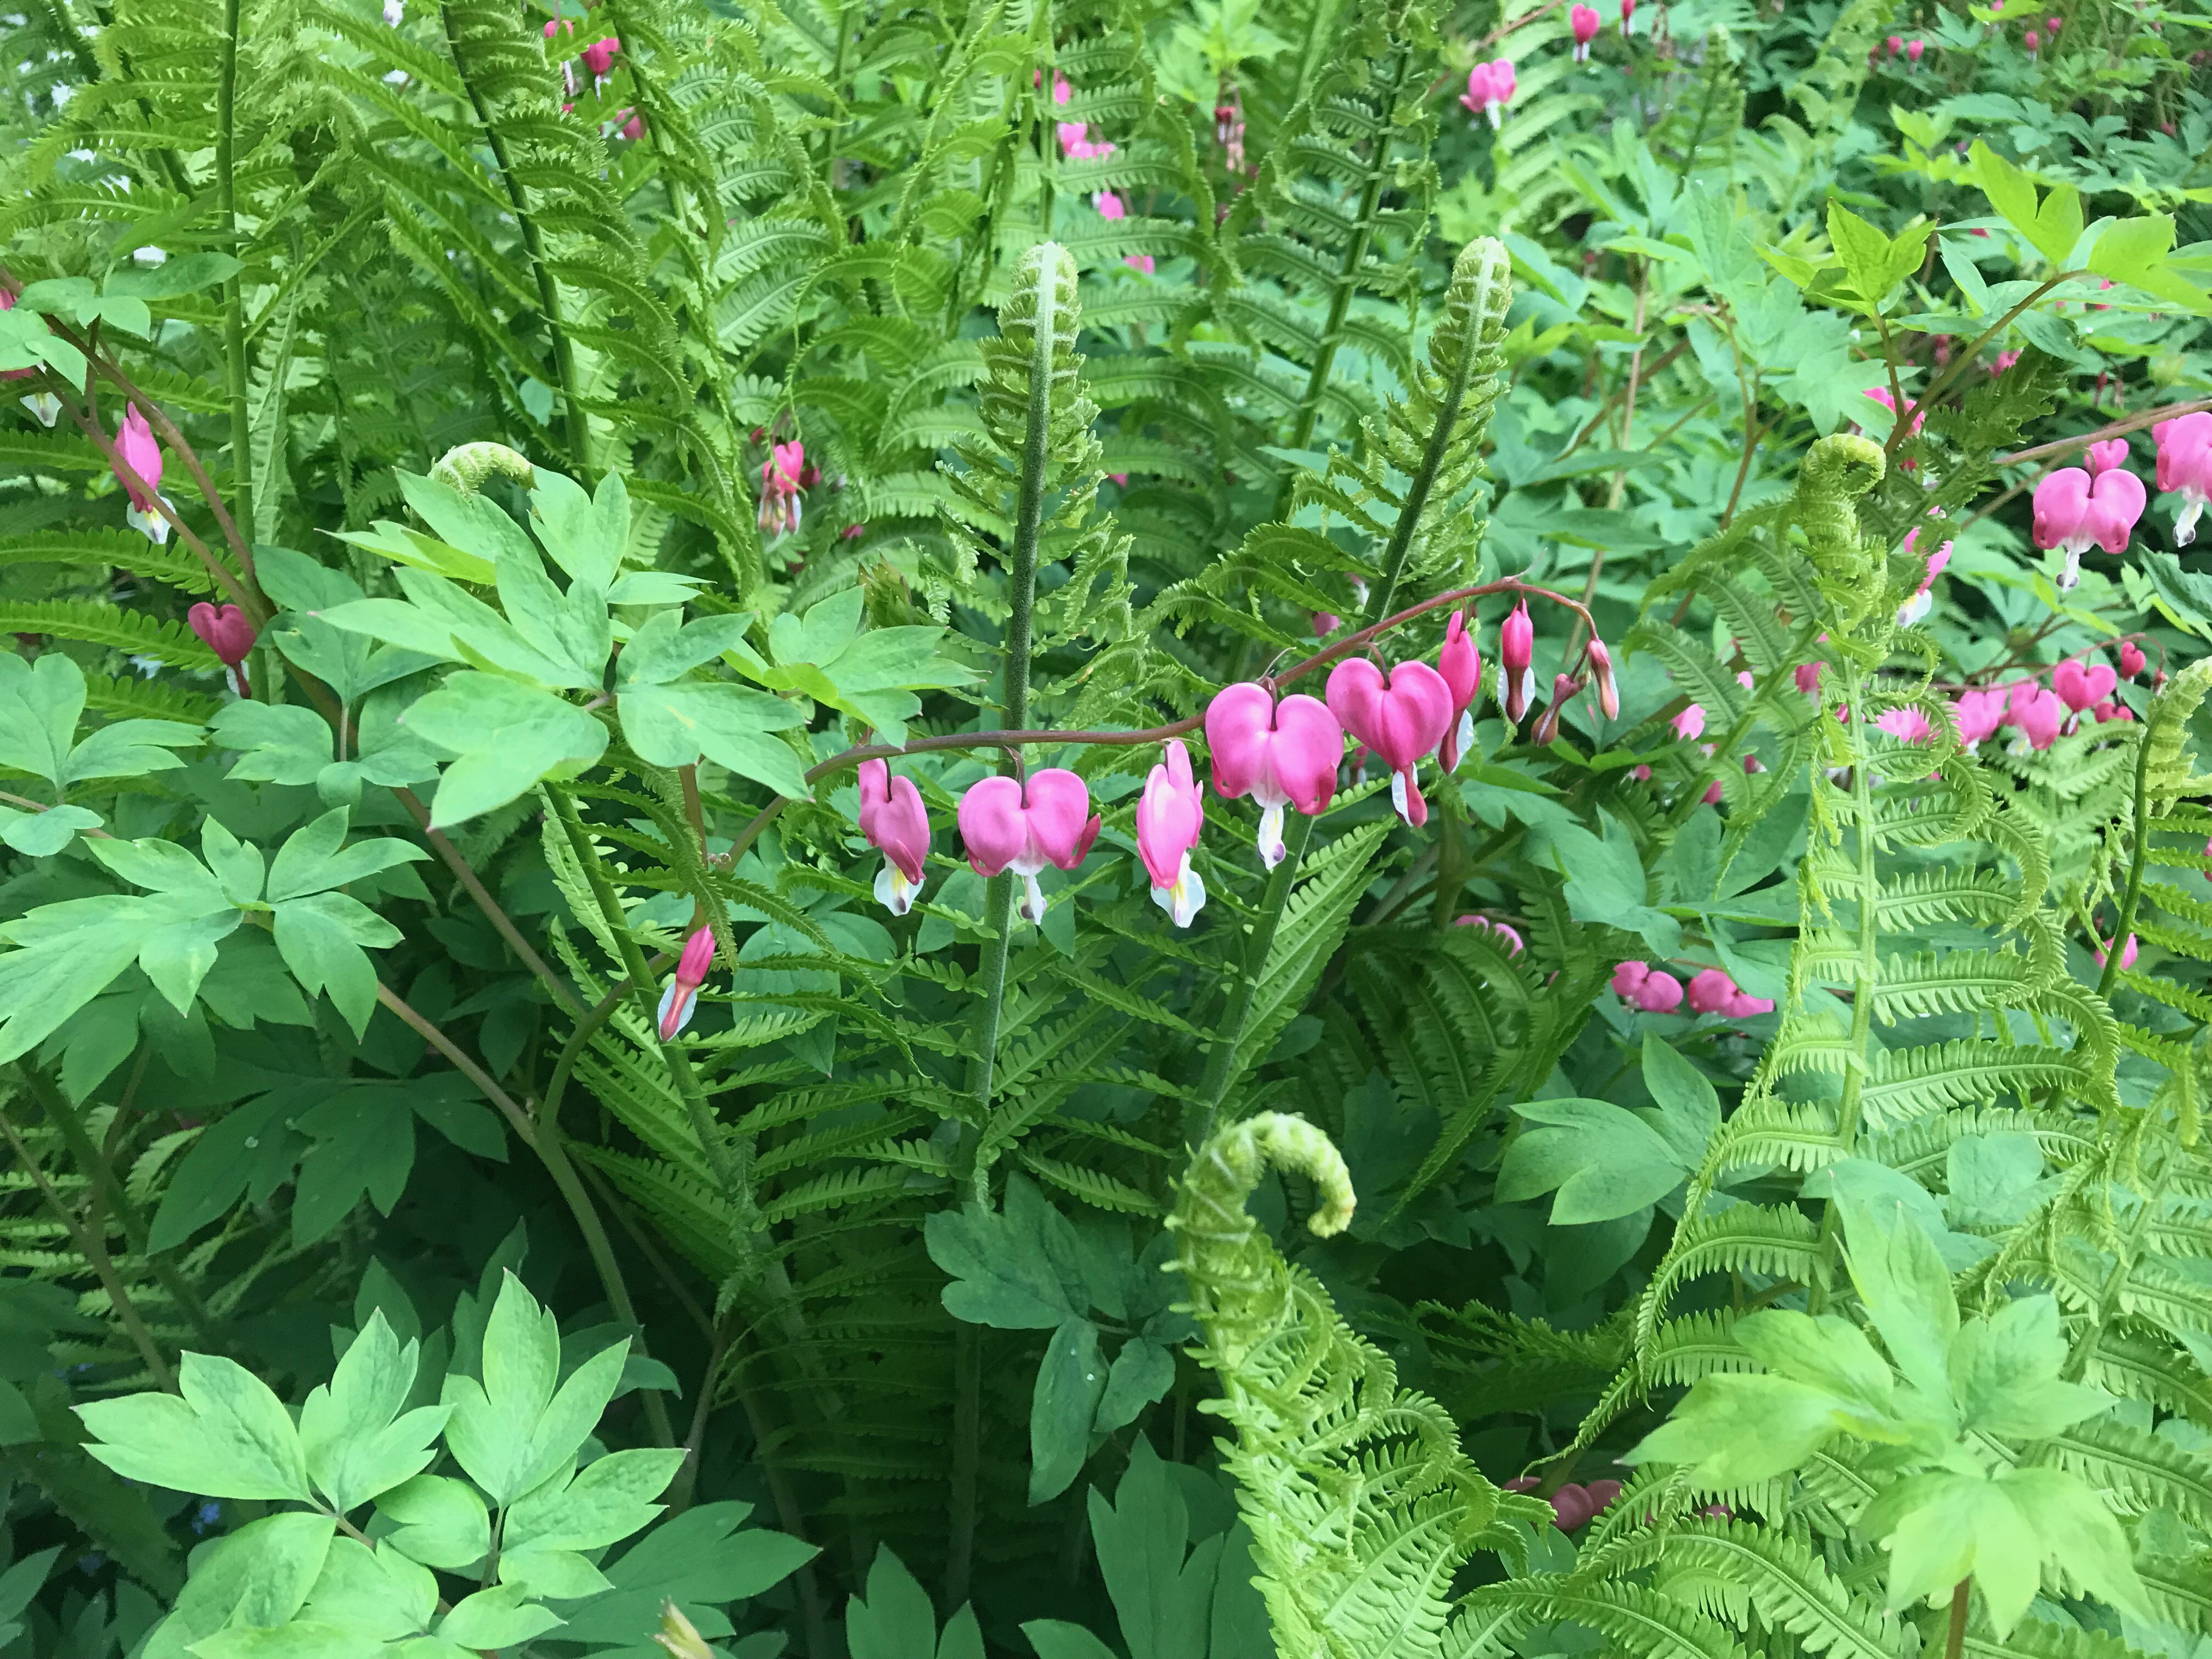 Image of Ferns and bleeding hearts in garden